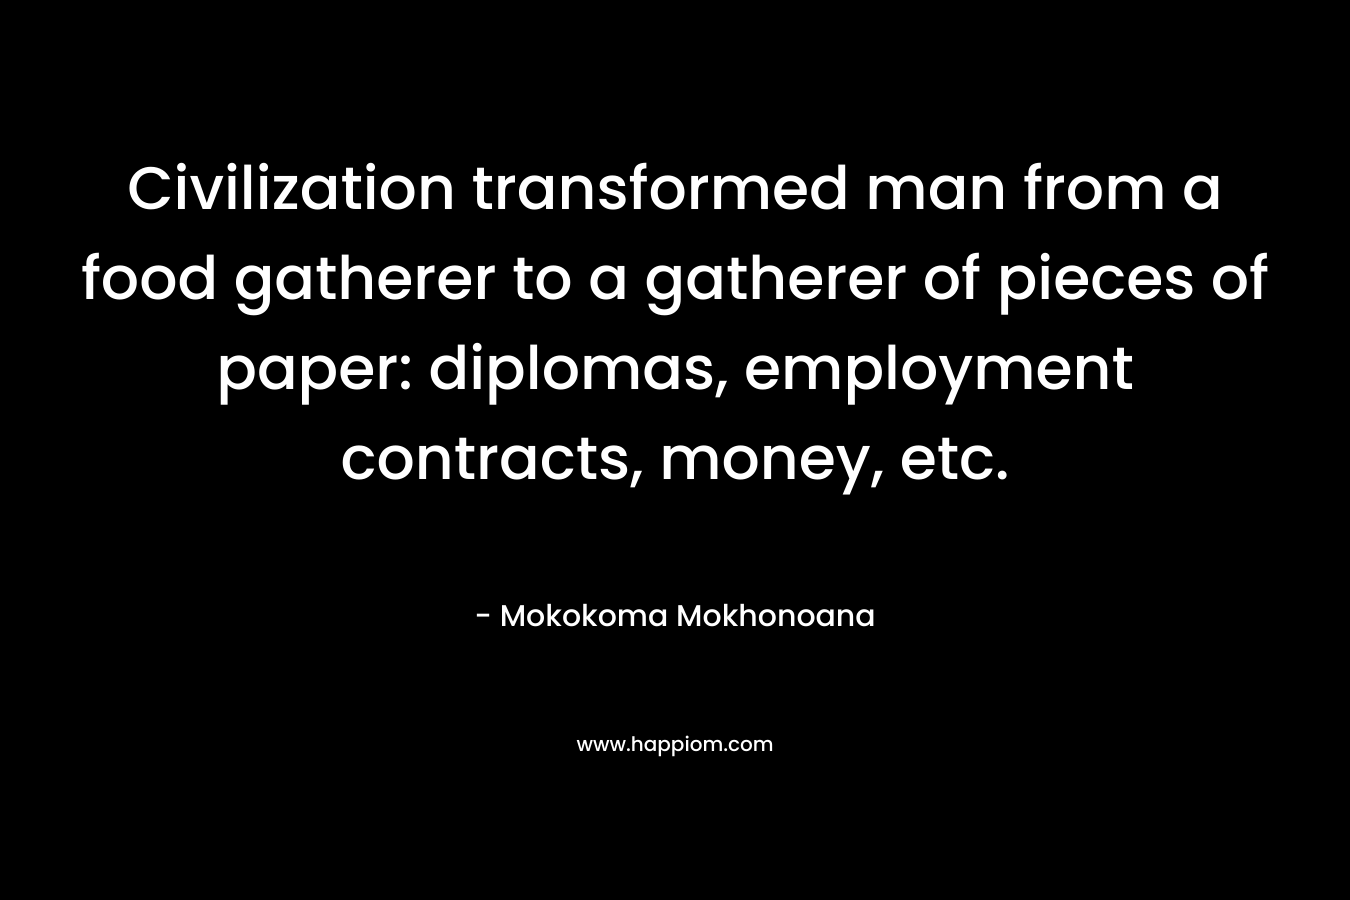 Civilization transformed man from a food gatherer to a gatherer of pieces of paper: diplomas, employment contracts, money, etc.